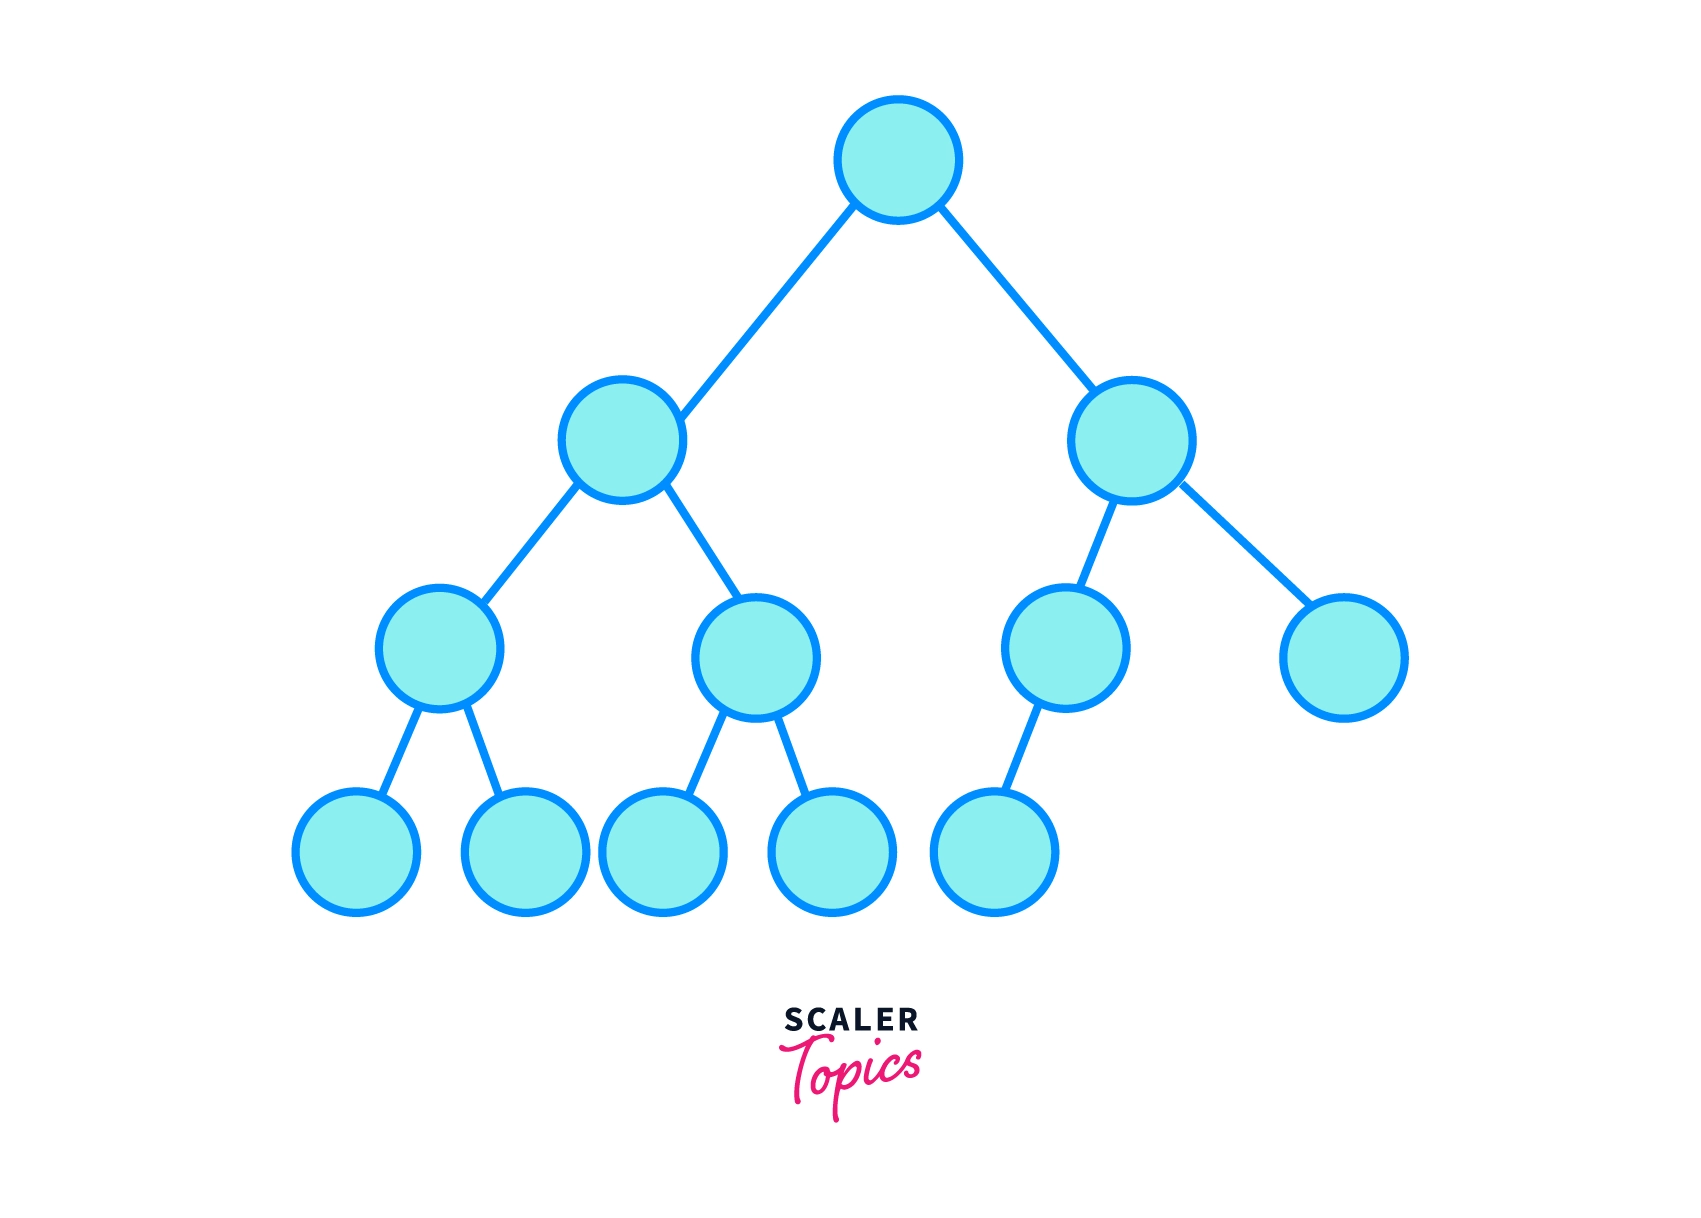 complete binary tree in data structure